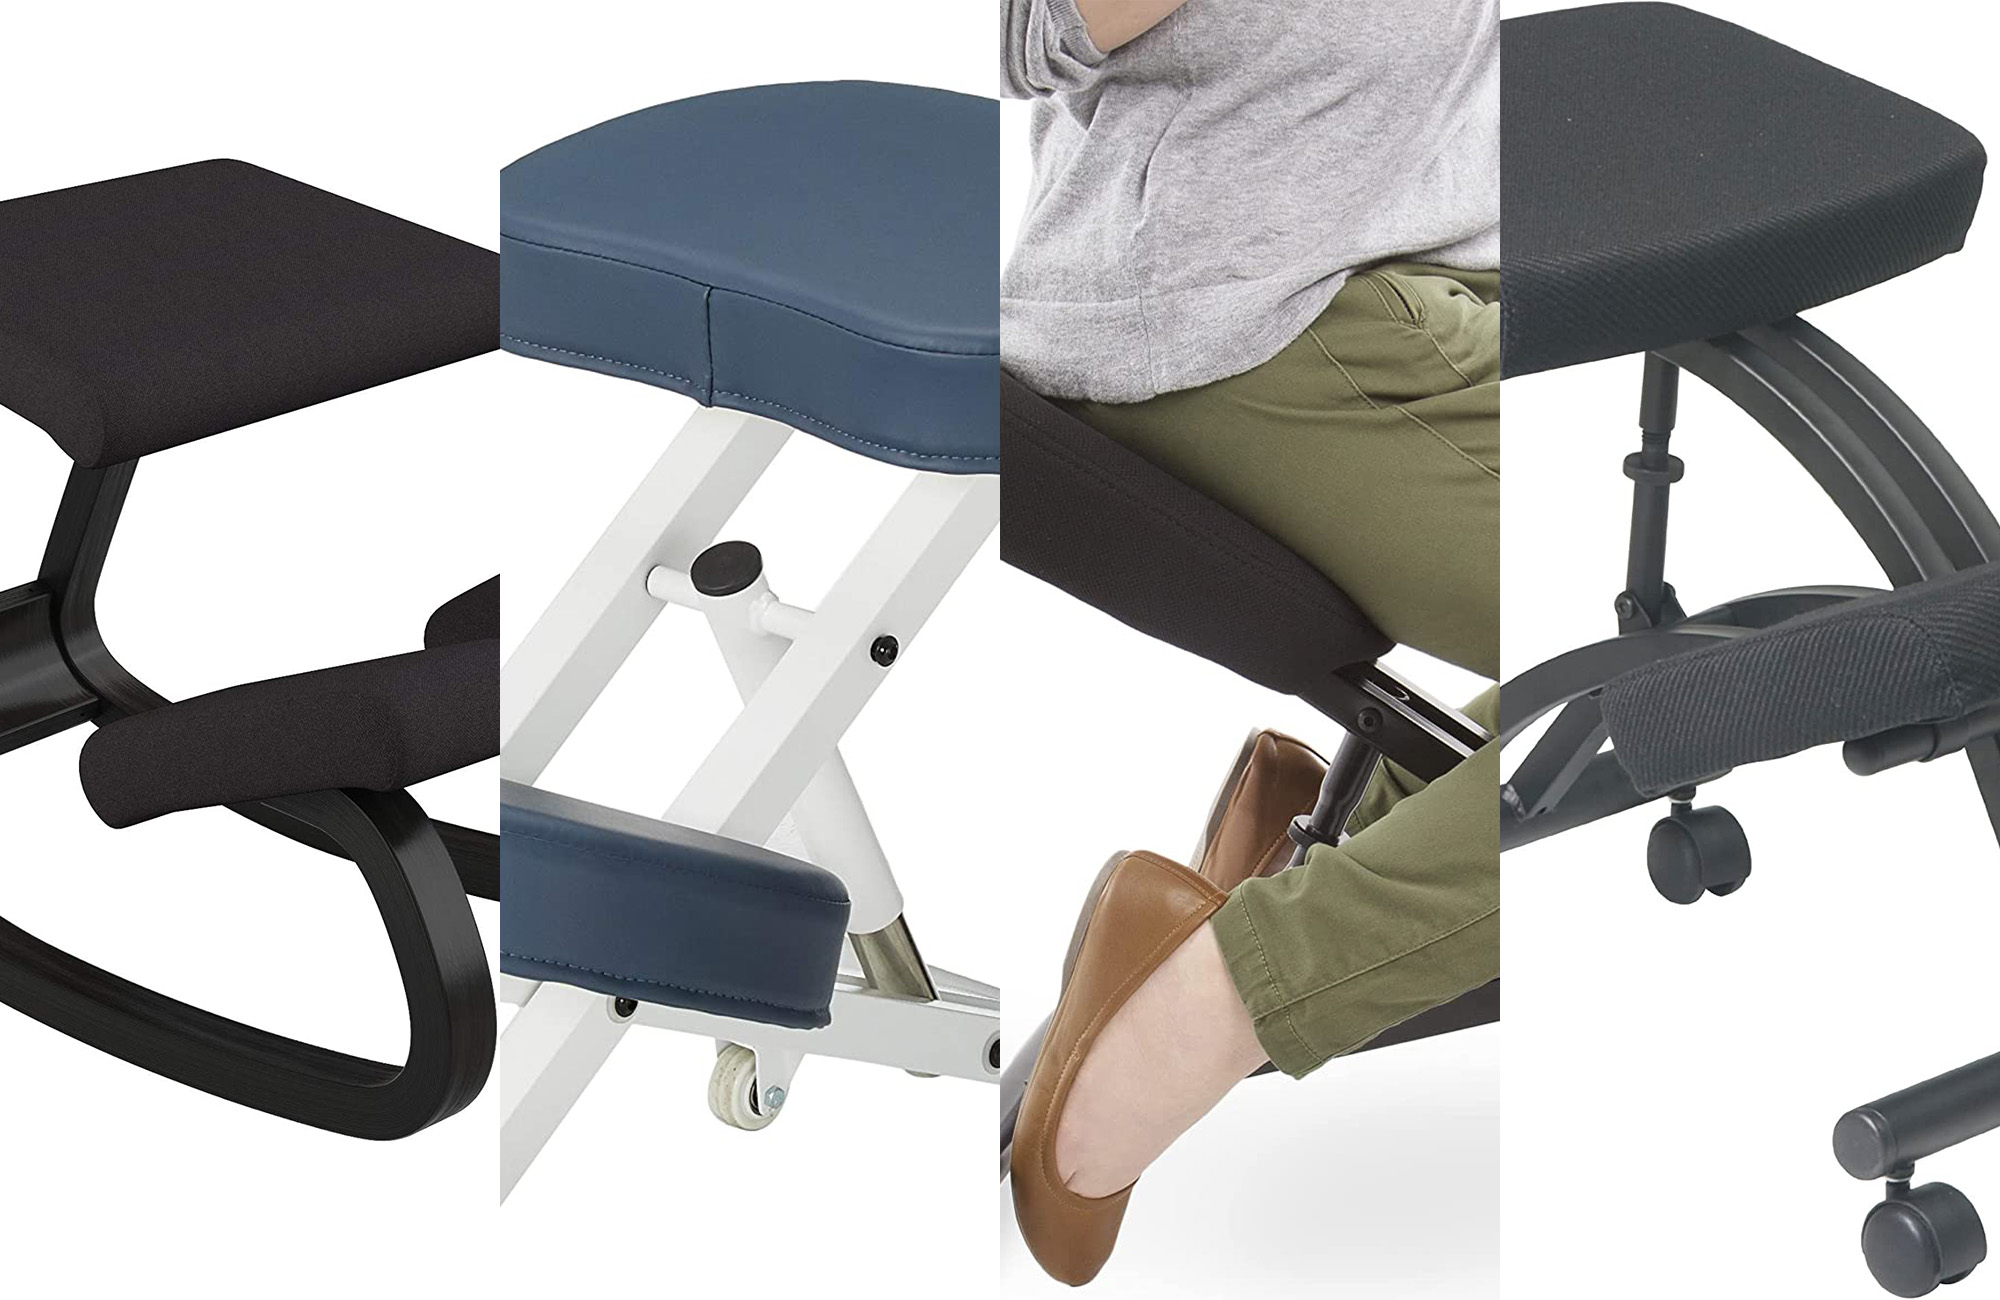 Should you get a kneeling chair? We tested the Sleekform Austin to